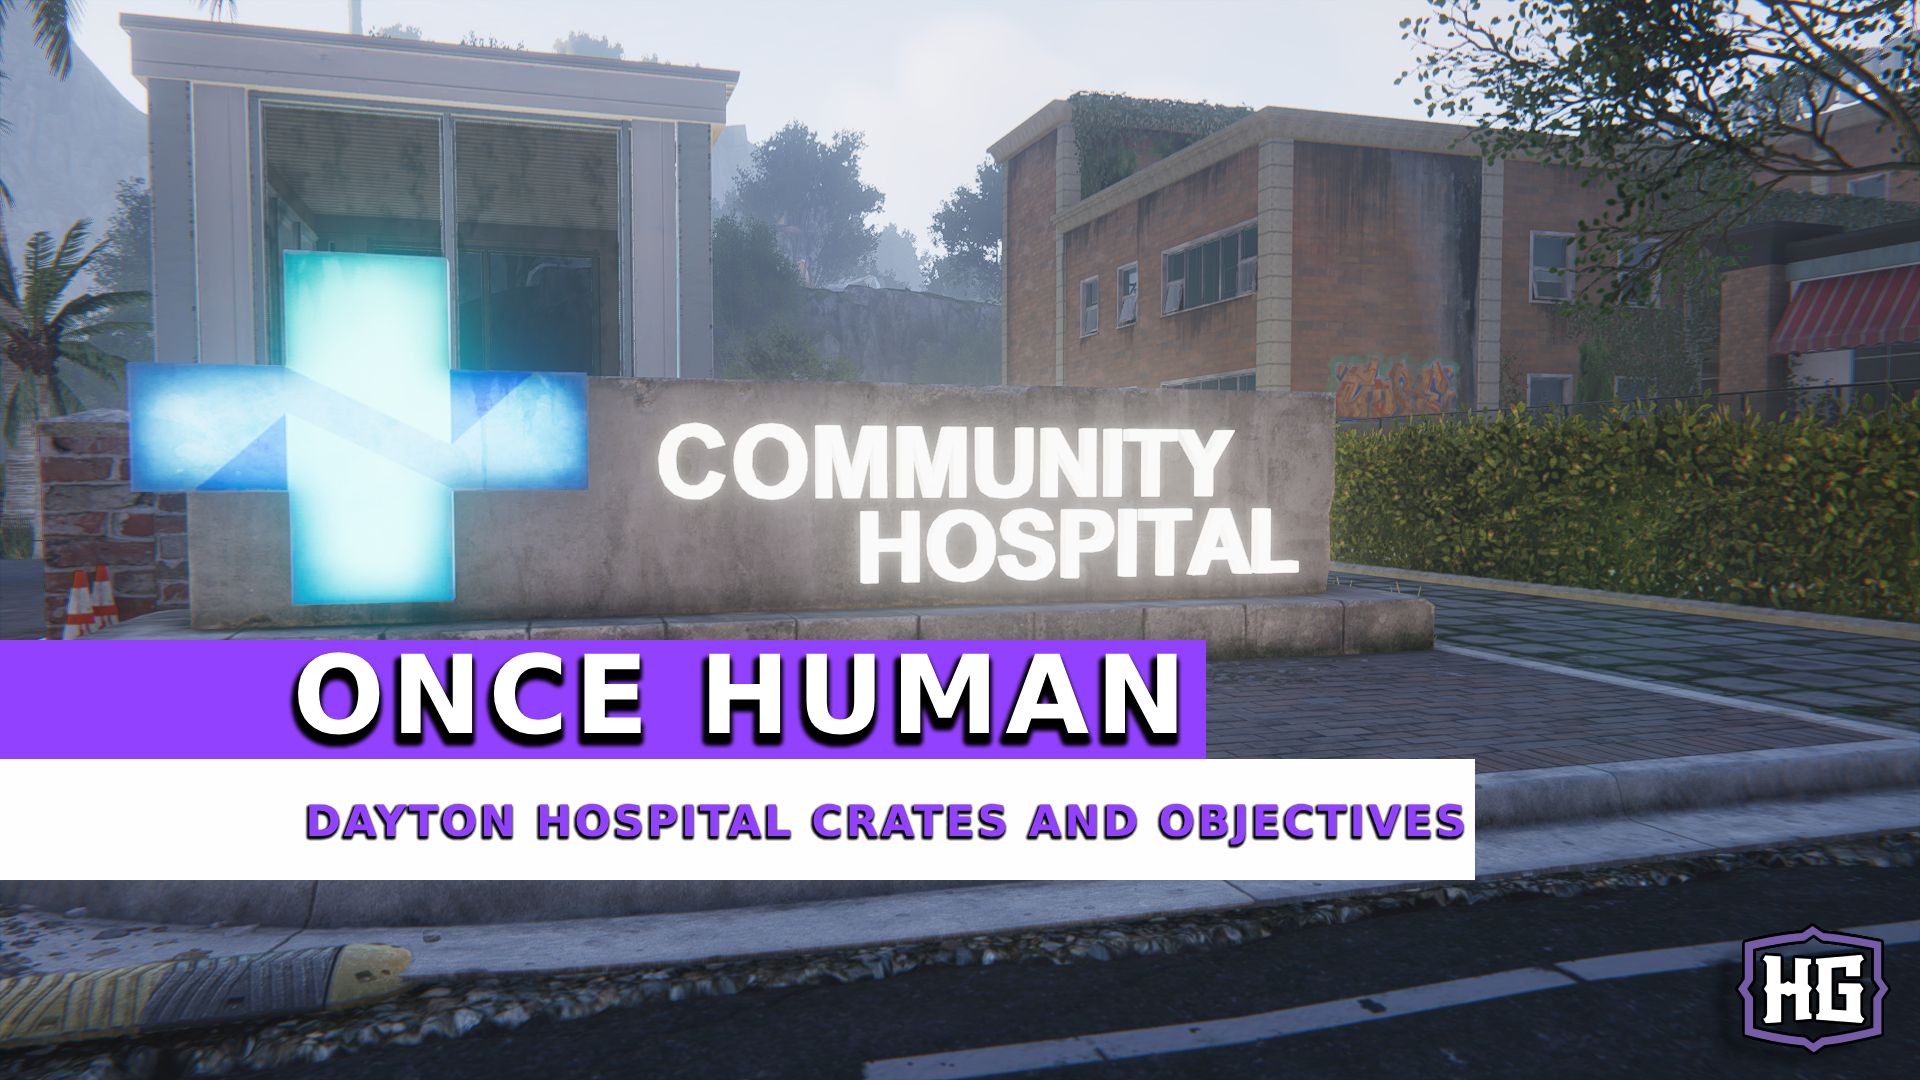 Dayton Hospital Crates And Objectives Once Human